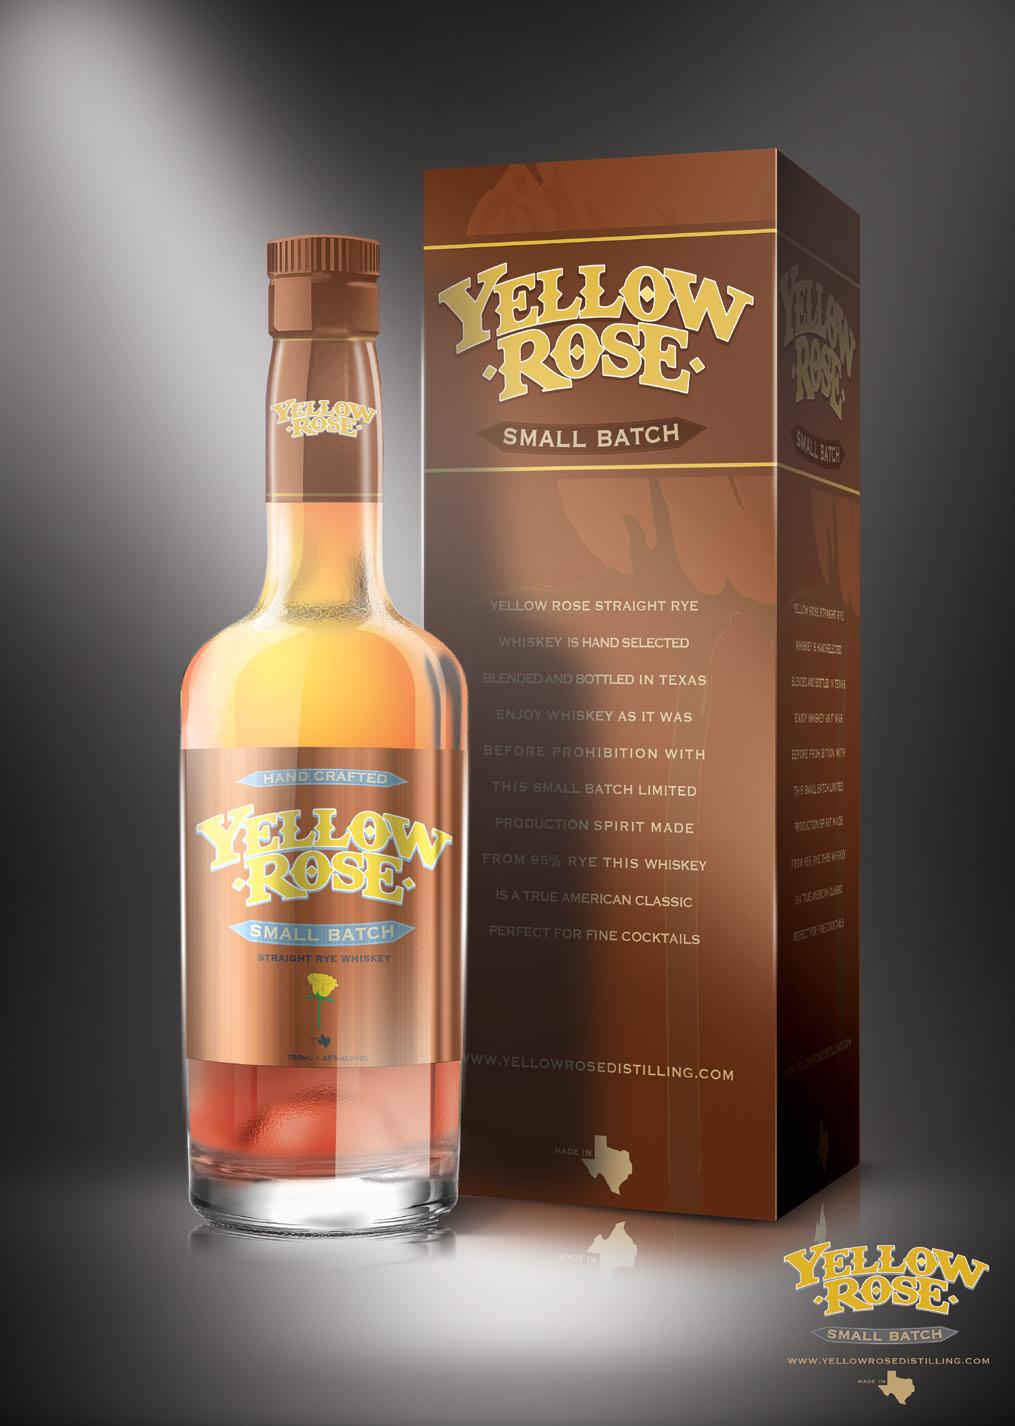 Yellow Rose is a rye whiskey distilled in Texas. This is a display of packaging and advertising.